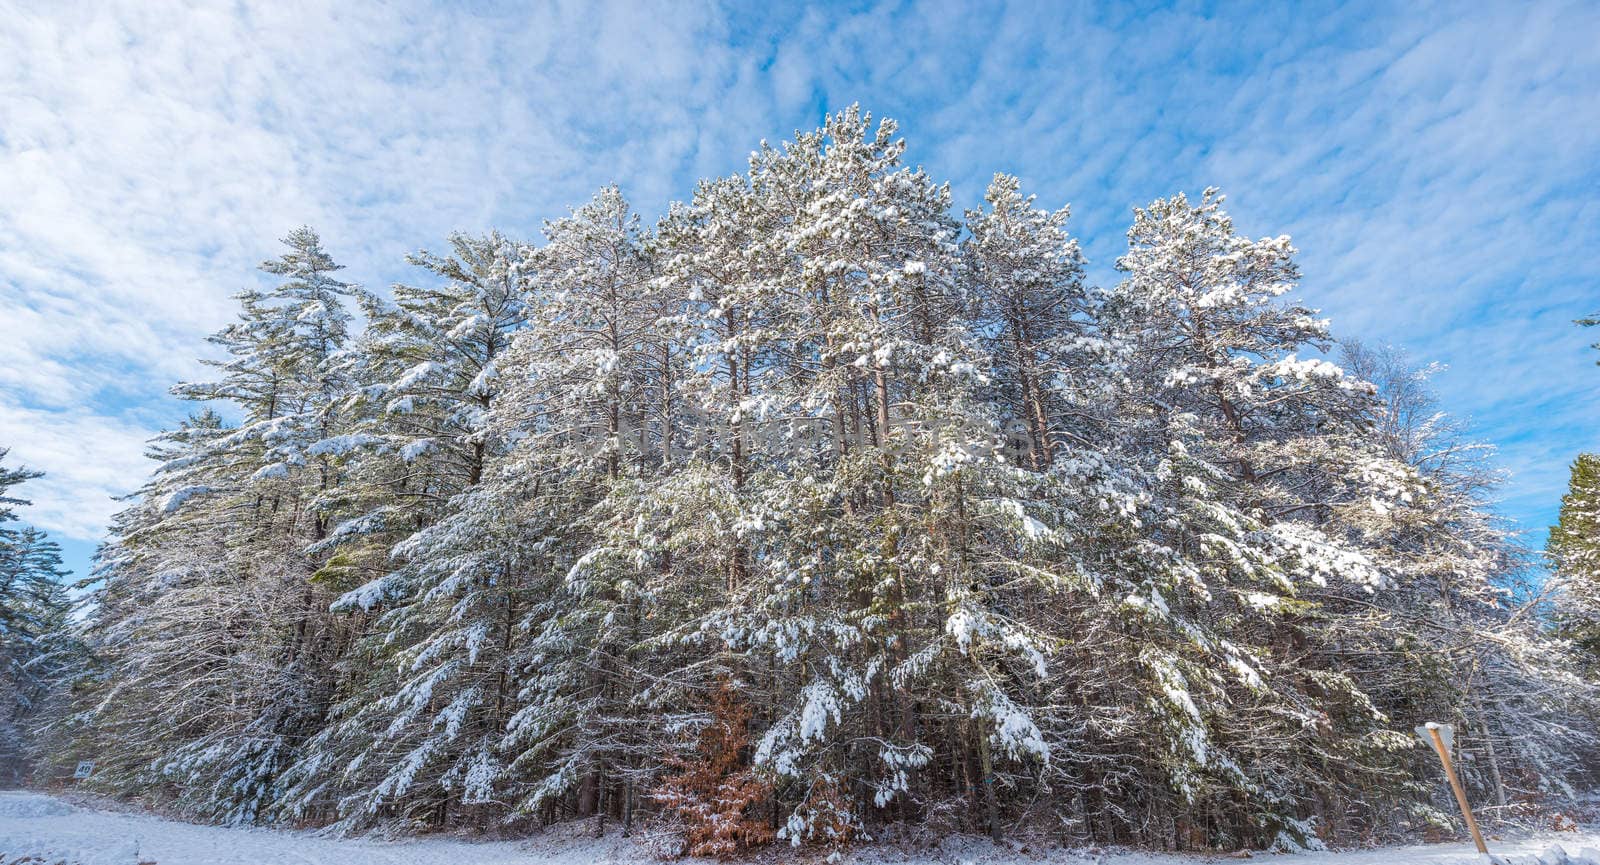 Bright sunny, frosty winter morning finds tall pine forests lightly covered in fresh fallen snow.